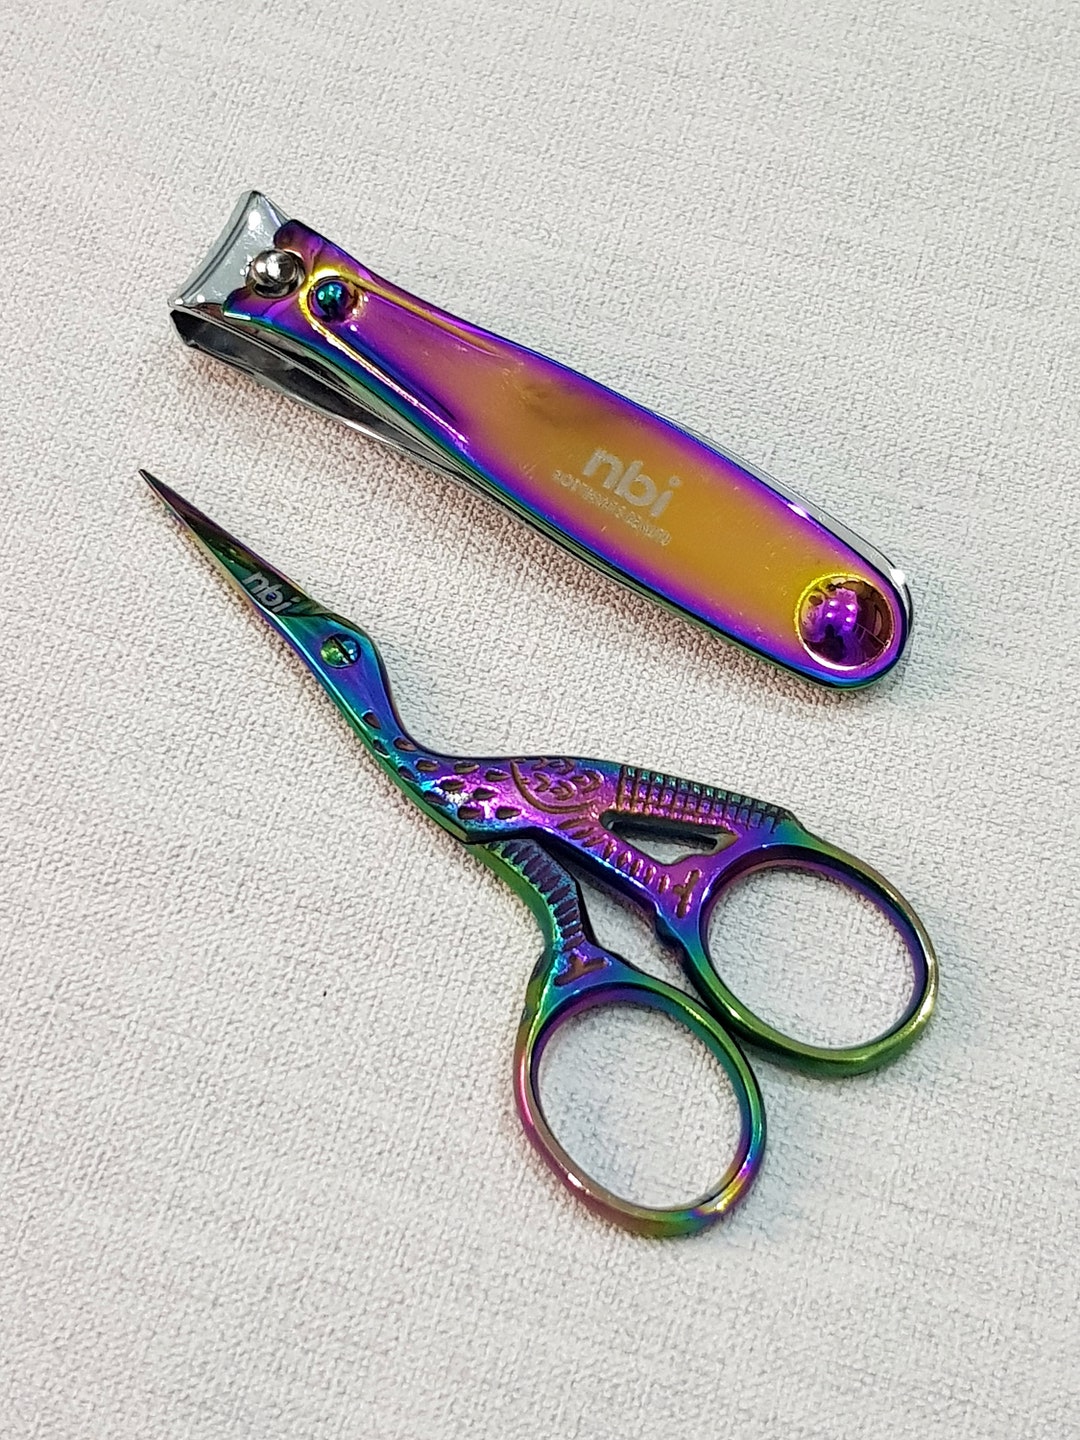 Crane Scissors 2 Sizes, 4 Colors, Bird-shaped Metal Small Scissors for  Crafts, Beautiful Knitting and Sewing Scissors, Shipped From Canada 